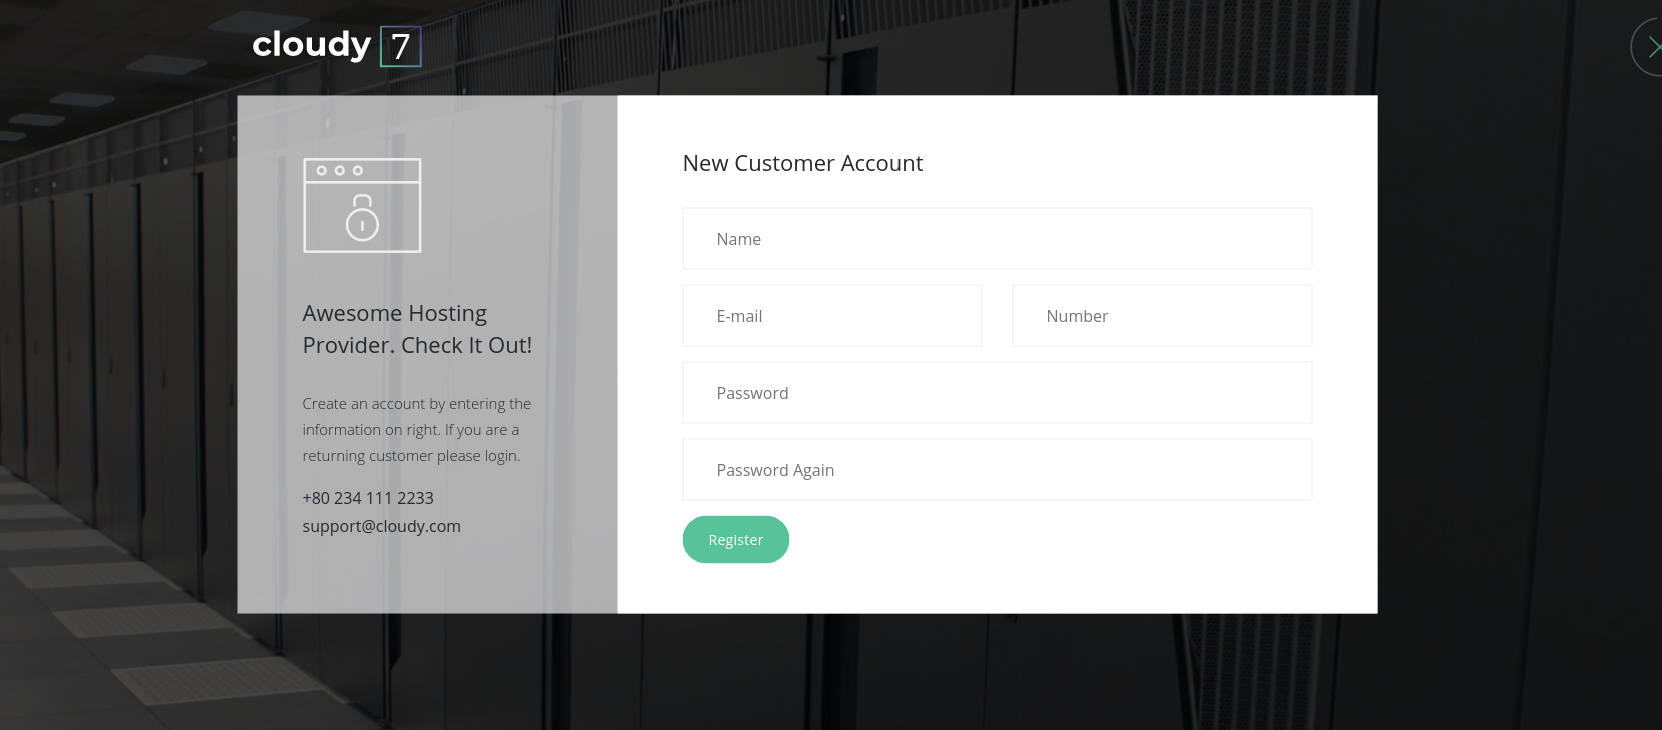 This is the login page of Cloudy 7 Bootstrap 4 admin template